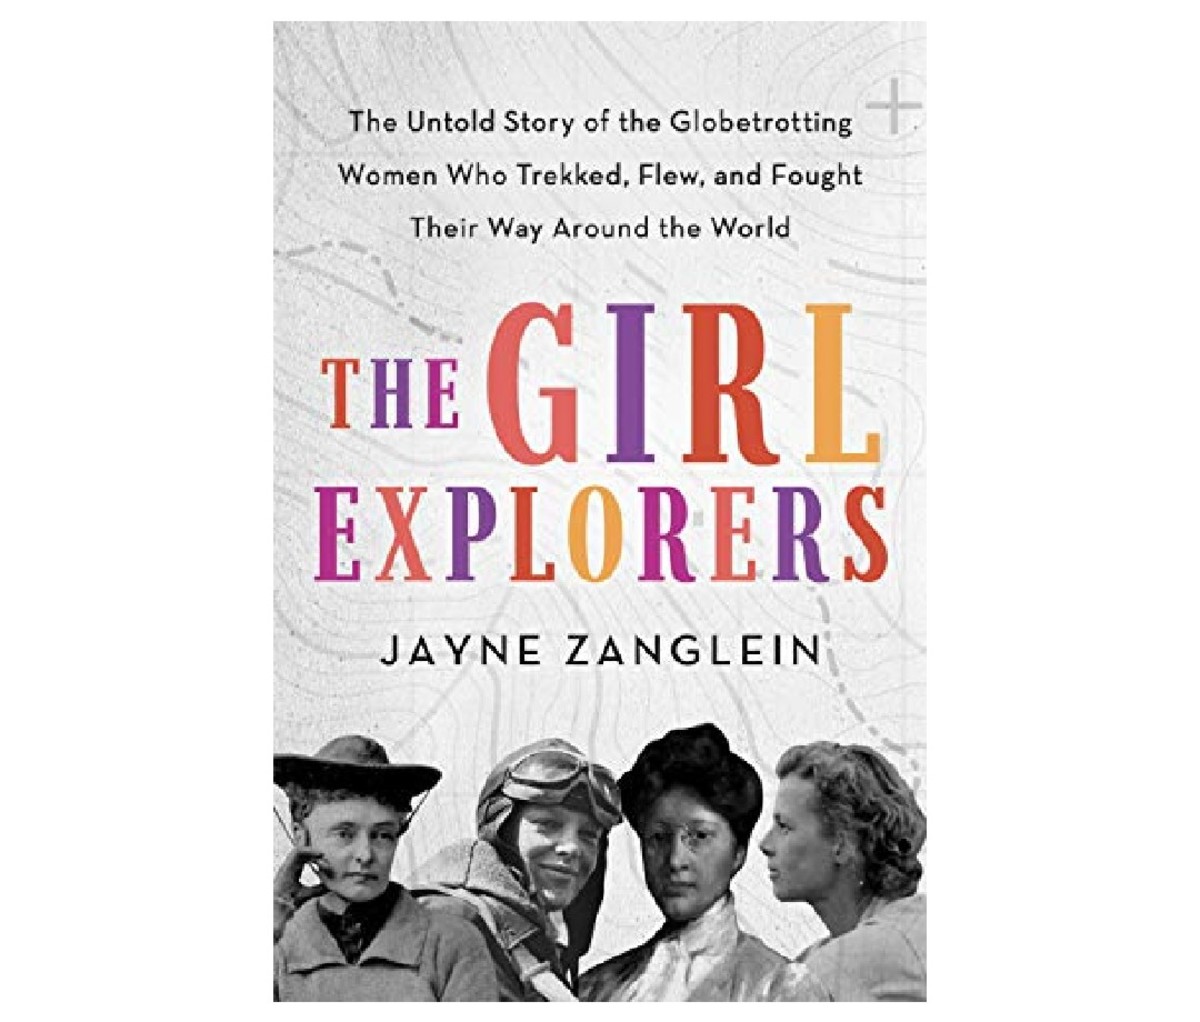 The book cover for The Girl Explorers: The Untold Story of the Globetrotting Women Who Trekked, Flew, and Fought Their Way Around the World by Jayne Zanglein